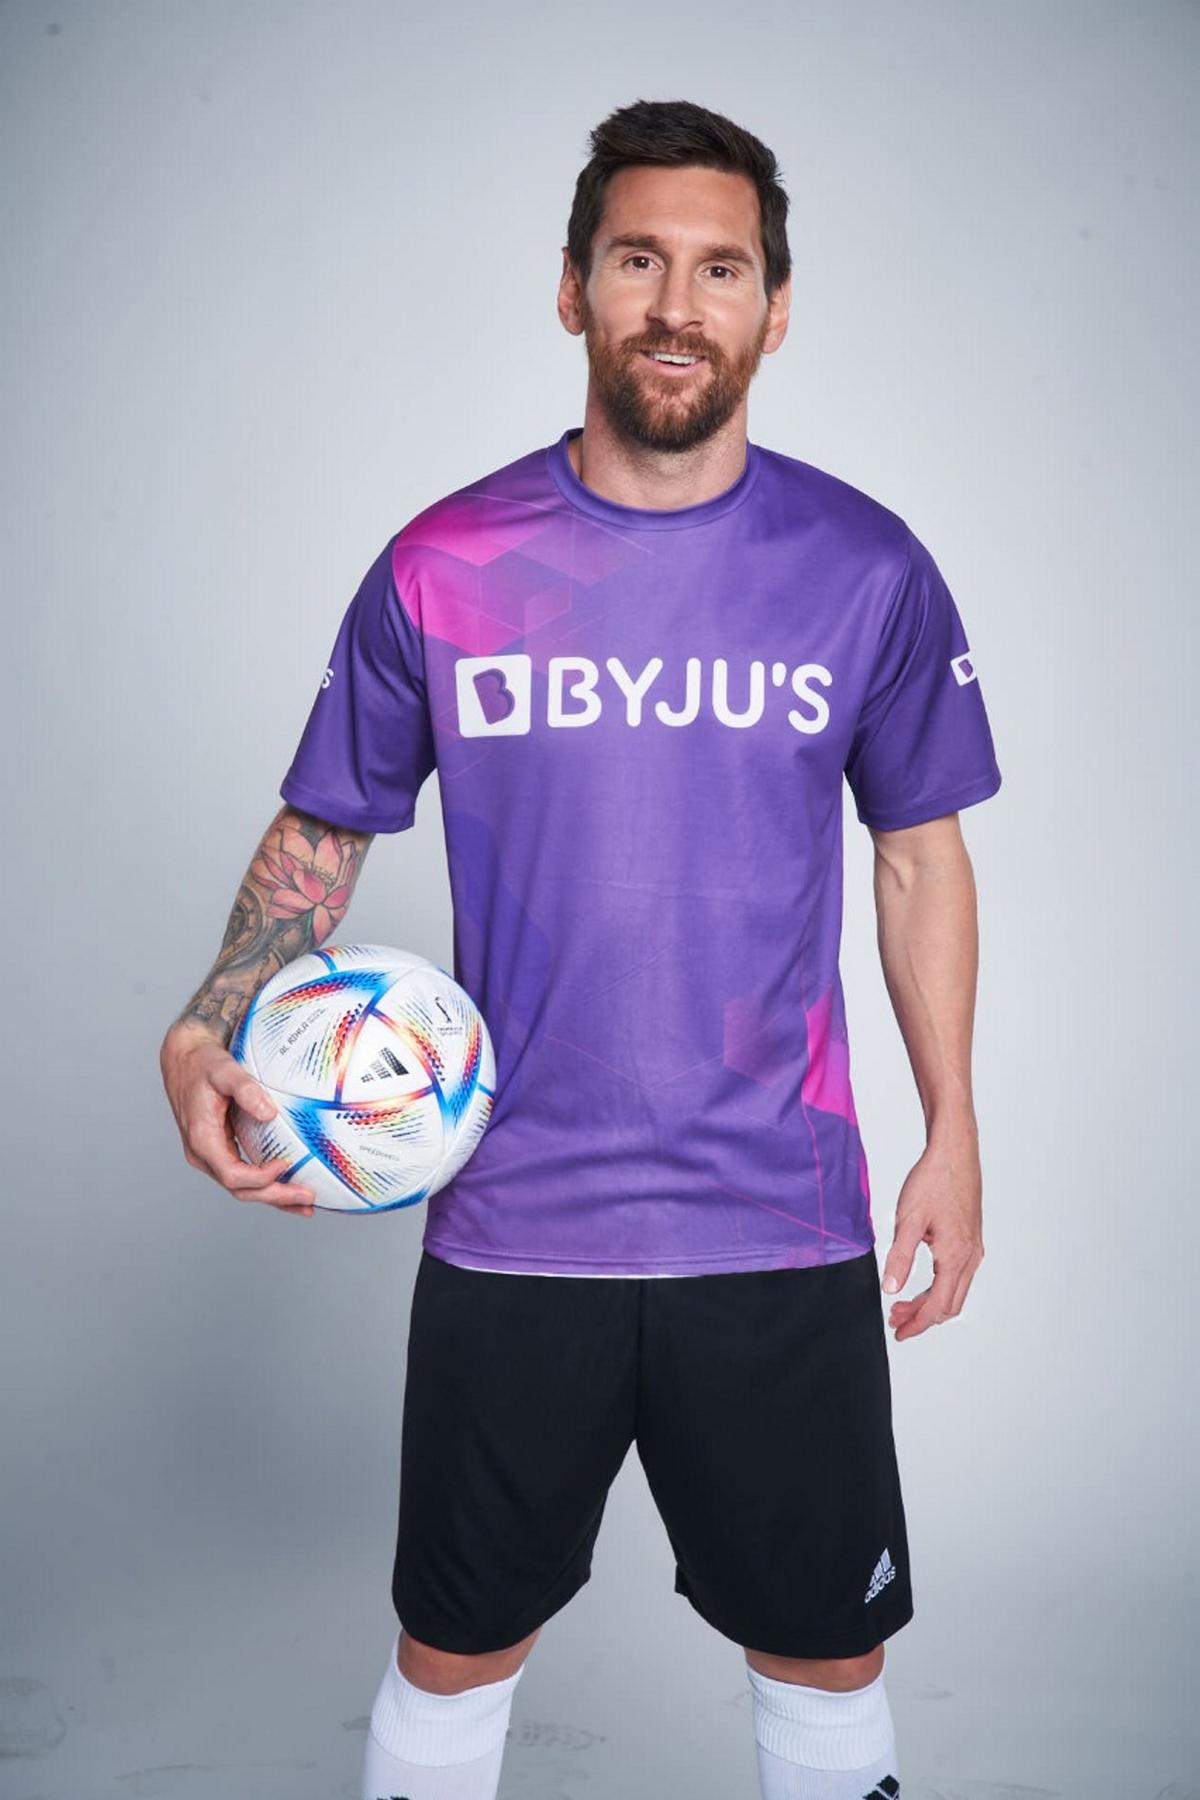 Lionel Messi is BYJU’S global brand ambassador of its social initiative ‘Education For All’